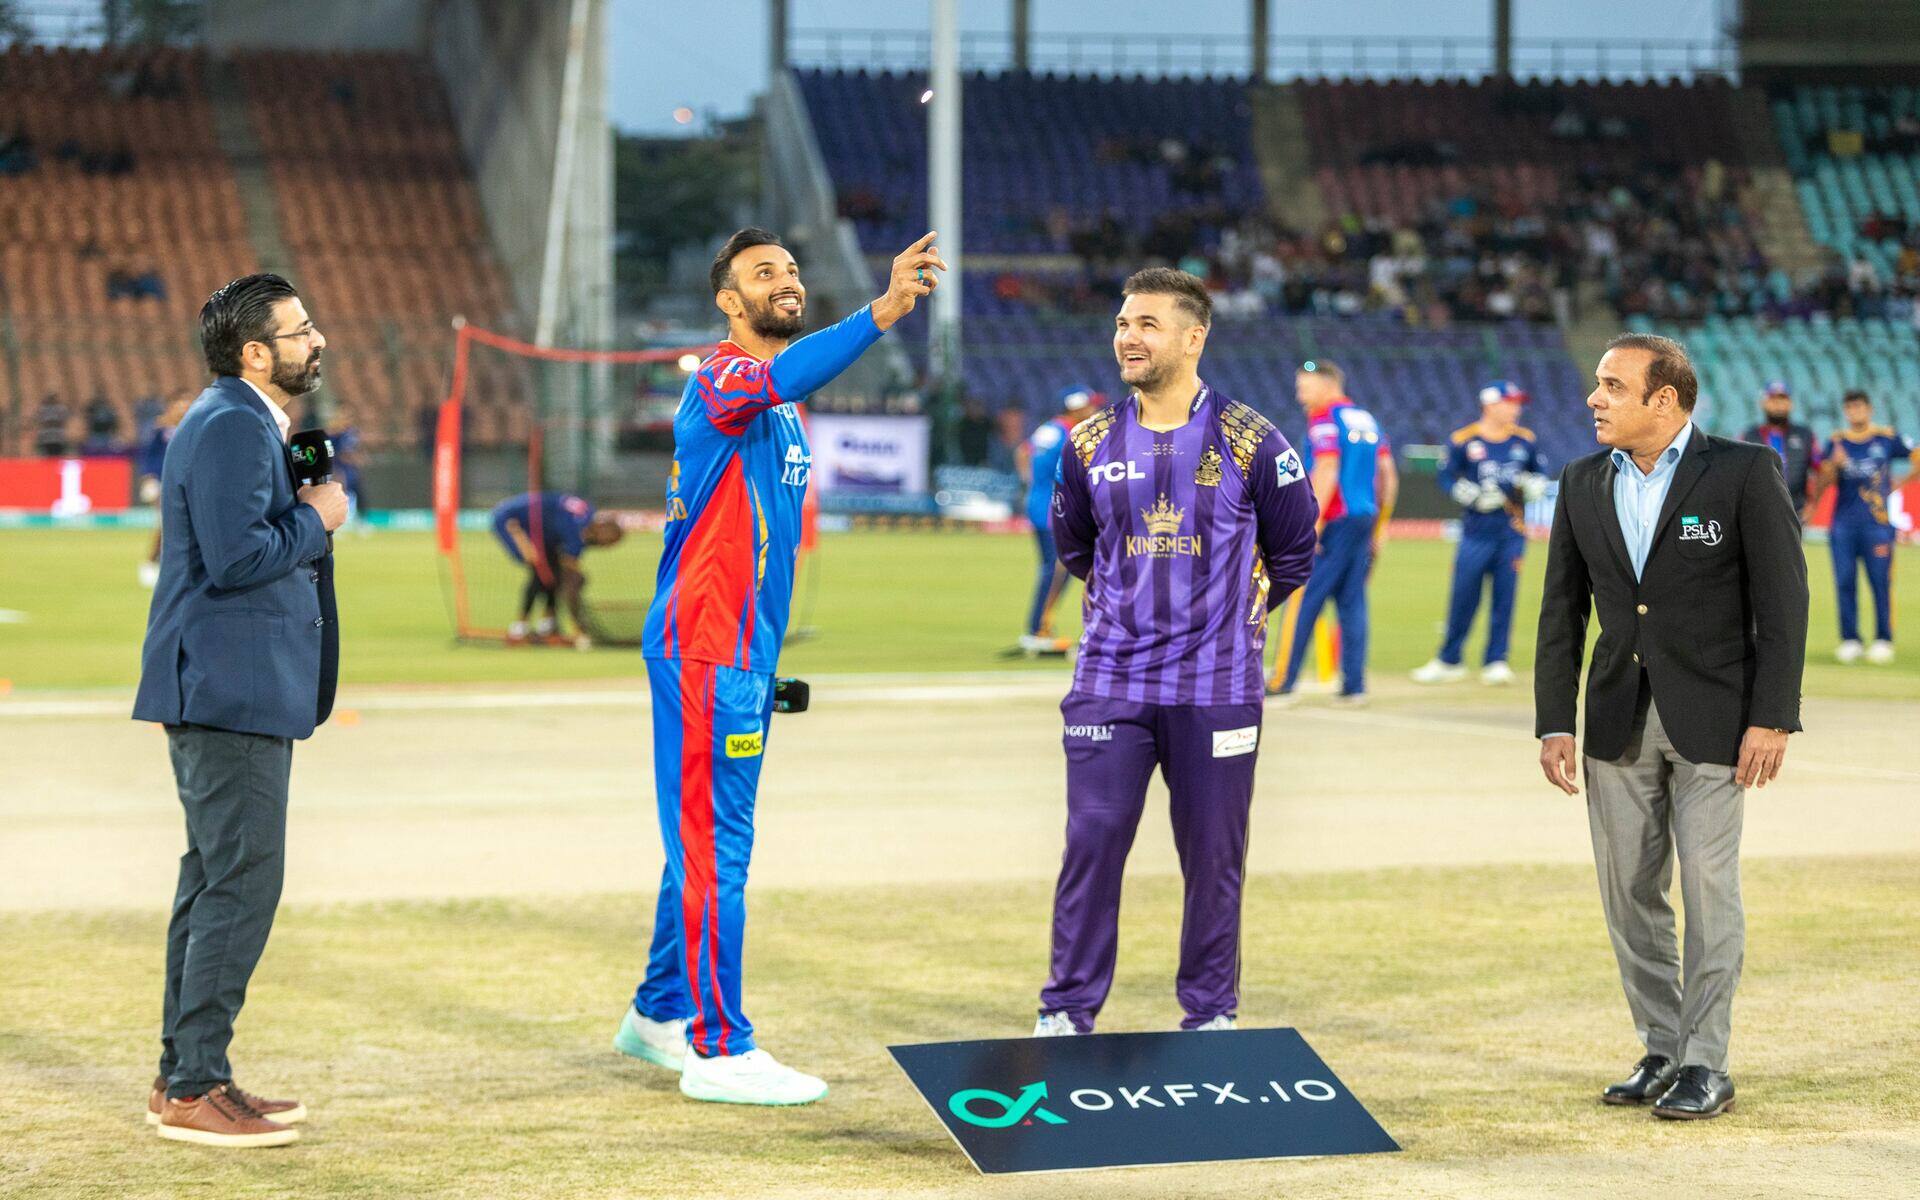 Shan Masood and Rilee Rossouw out for the toss (Source: X.com)